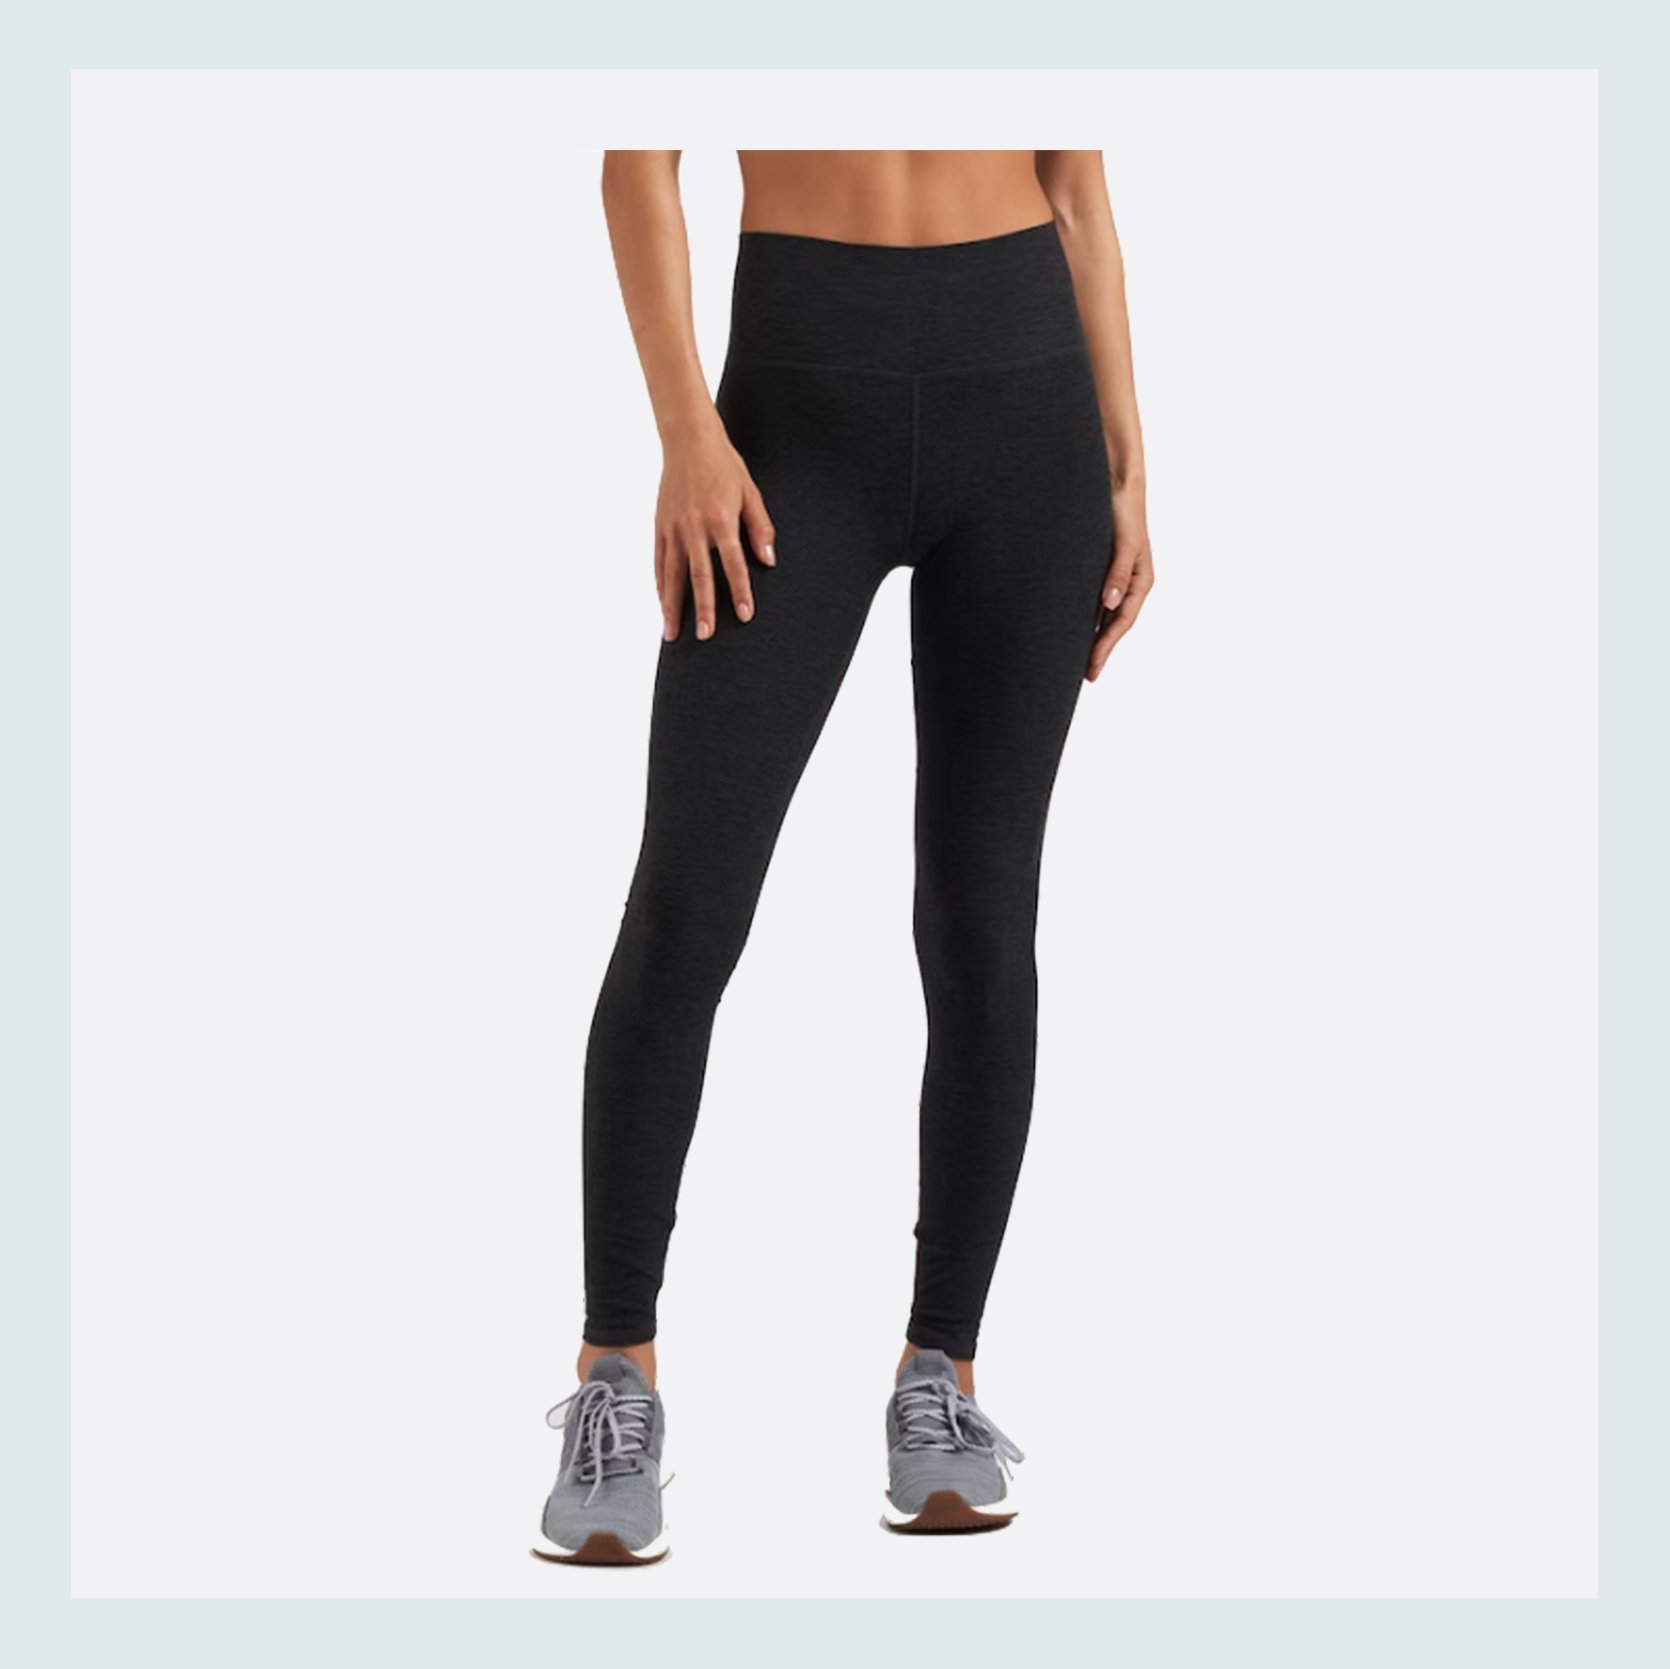 High Recommend!!! Leggings that don't fall down#2022outfits #fallleggi